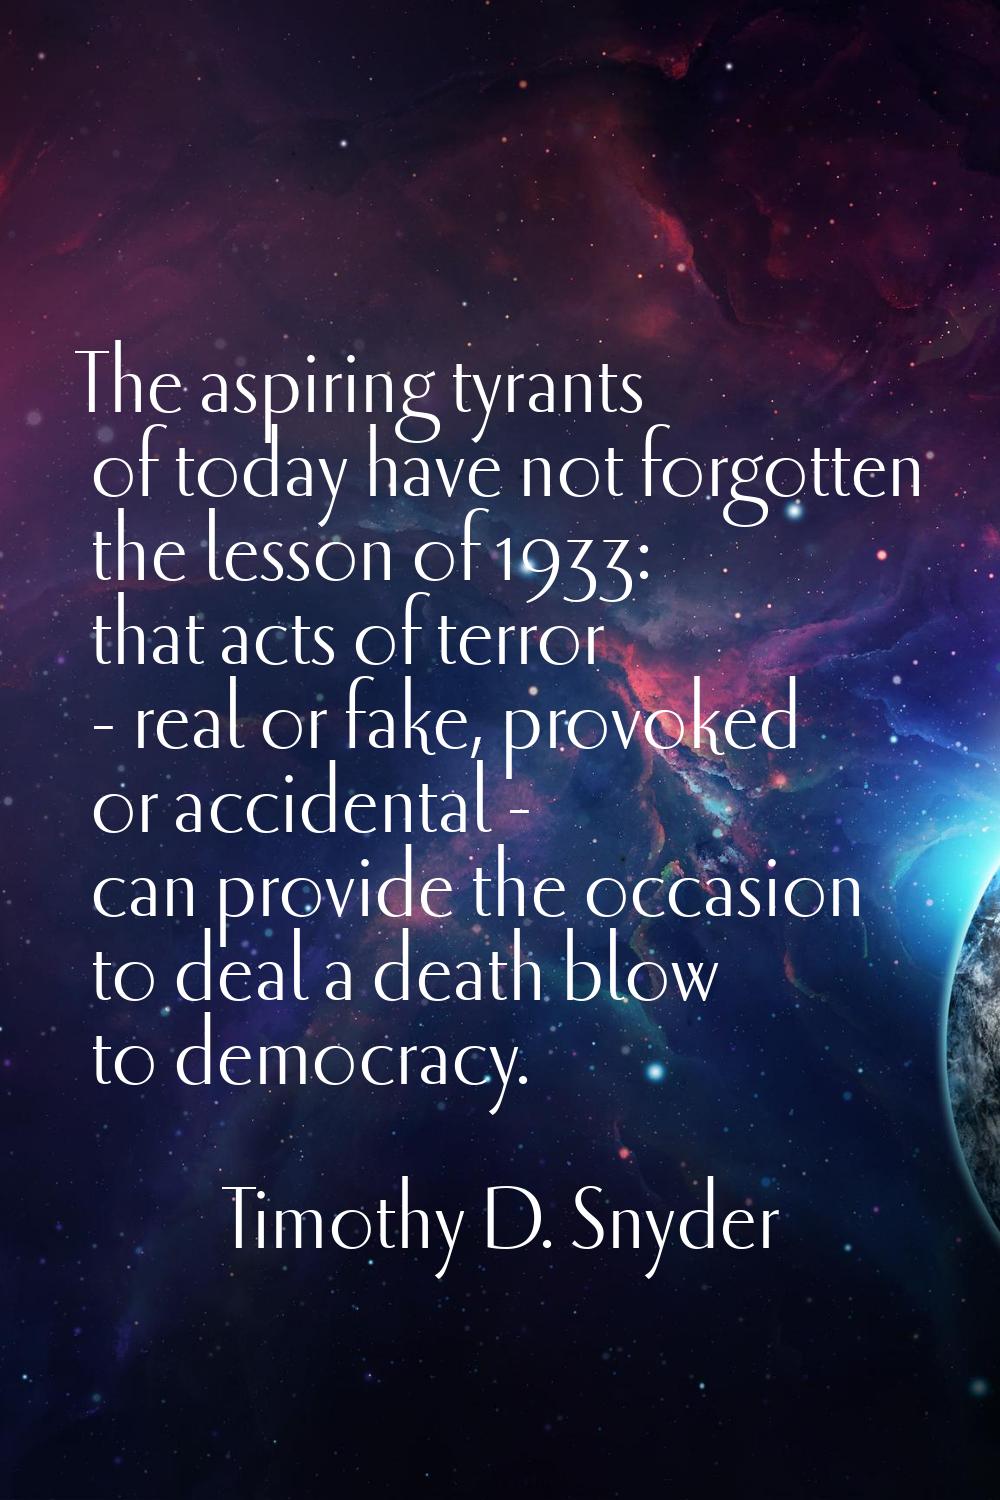 The aspiring tyrants of today have not forgotten the lesson of 1933: that acts of terror - real or 